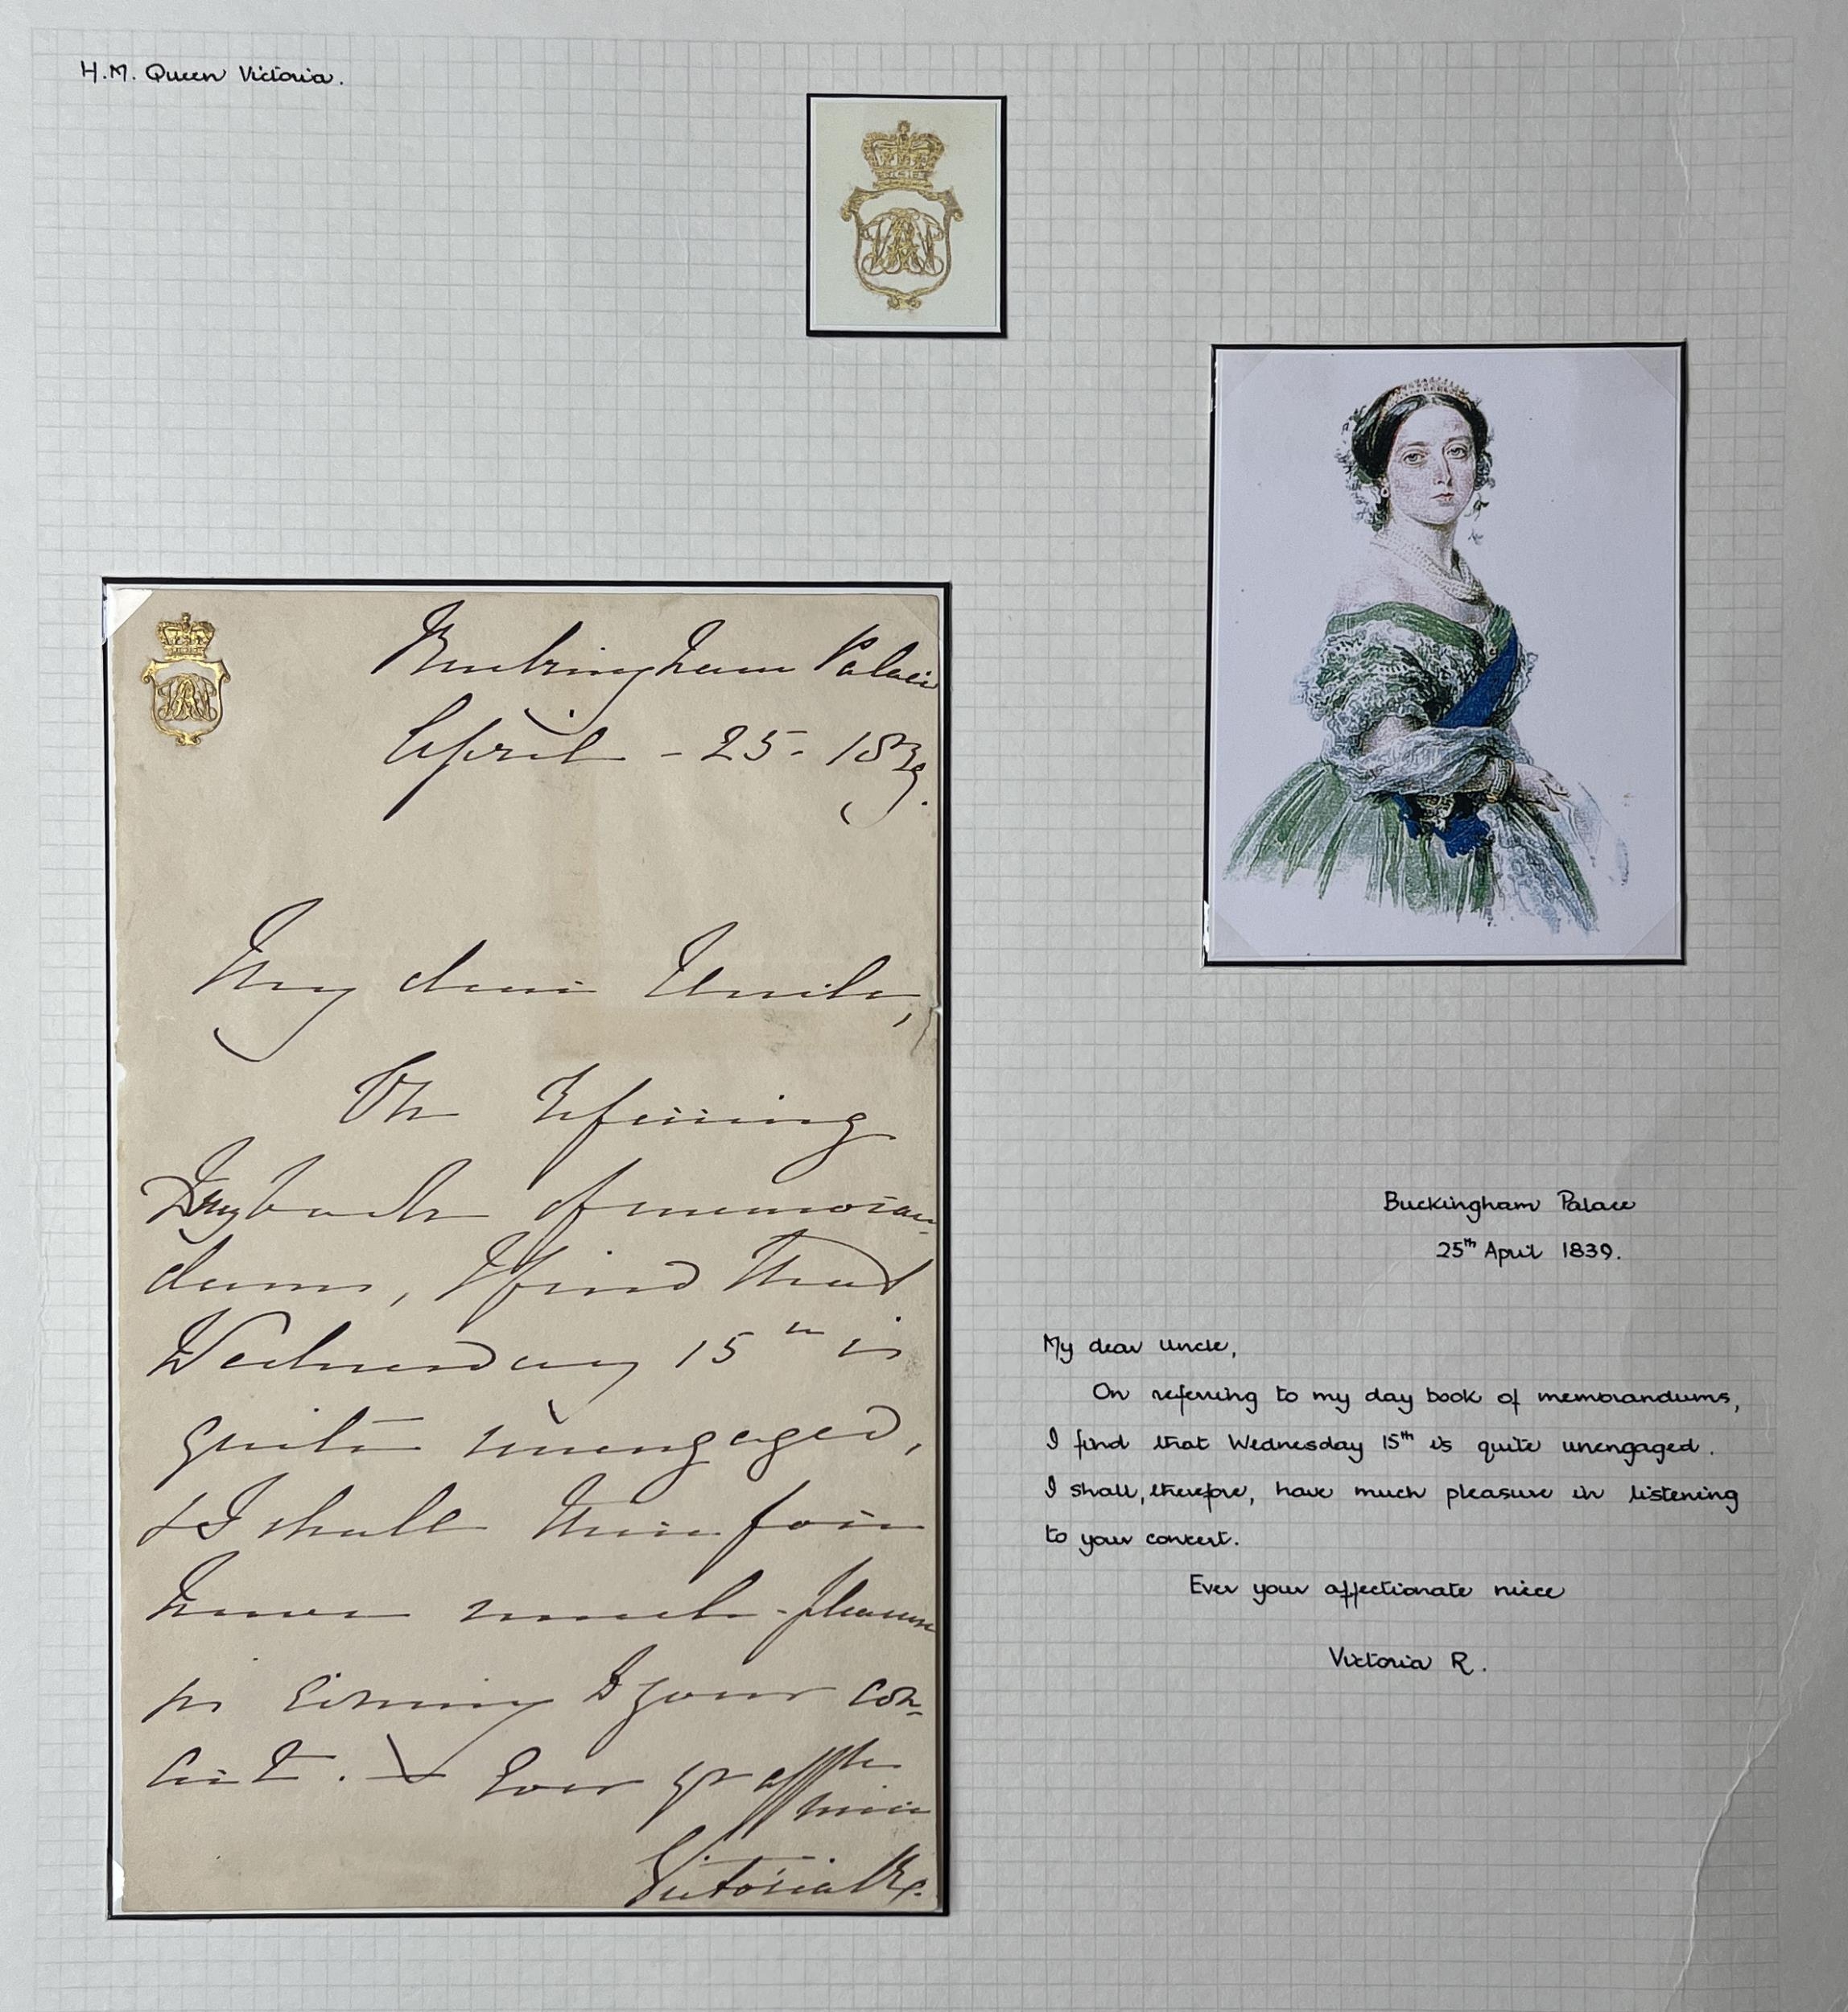 1839 handwritten letter by Queen Victoria, from Buckingham Palace